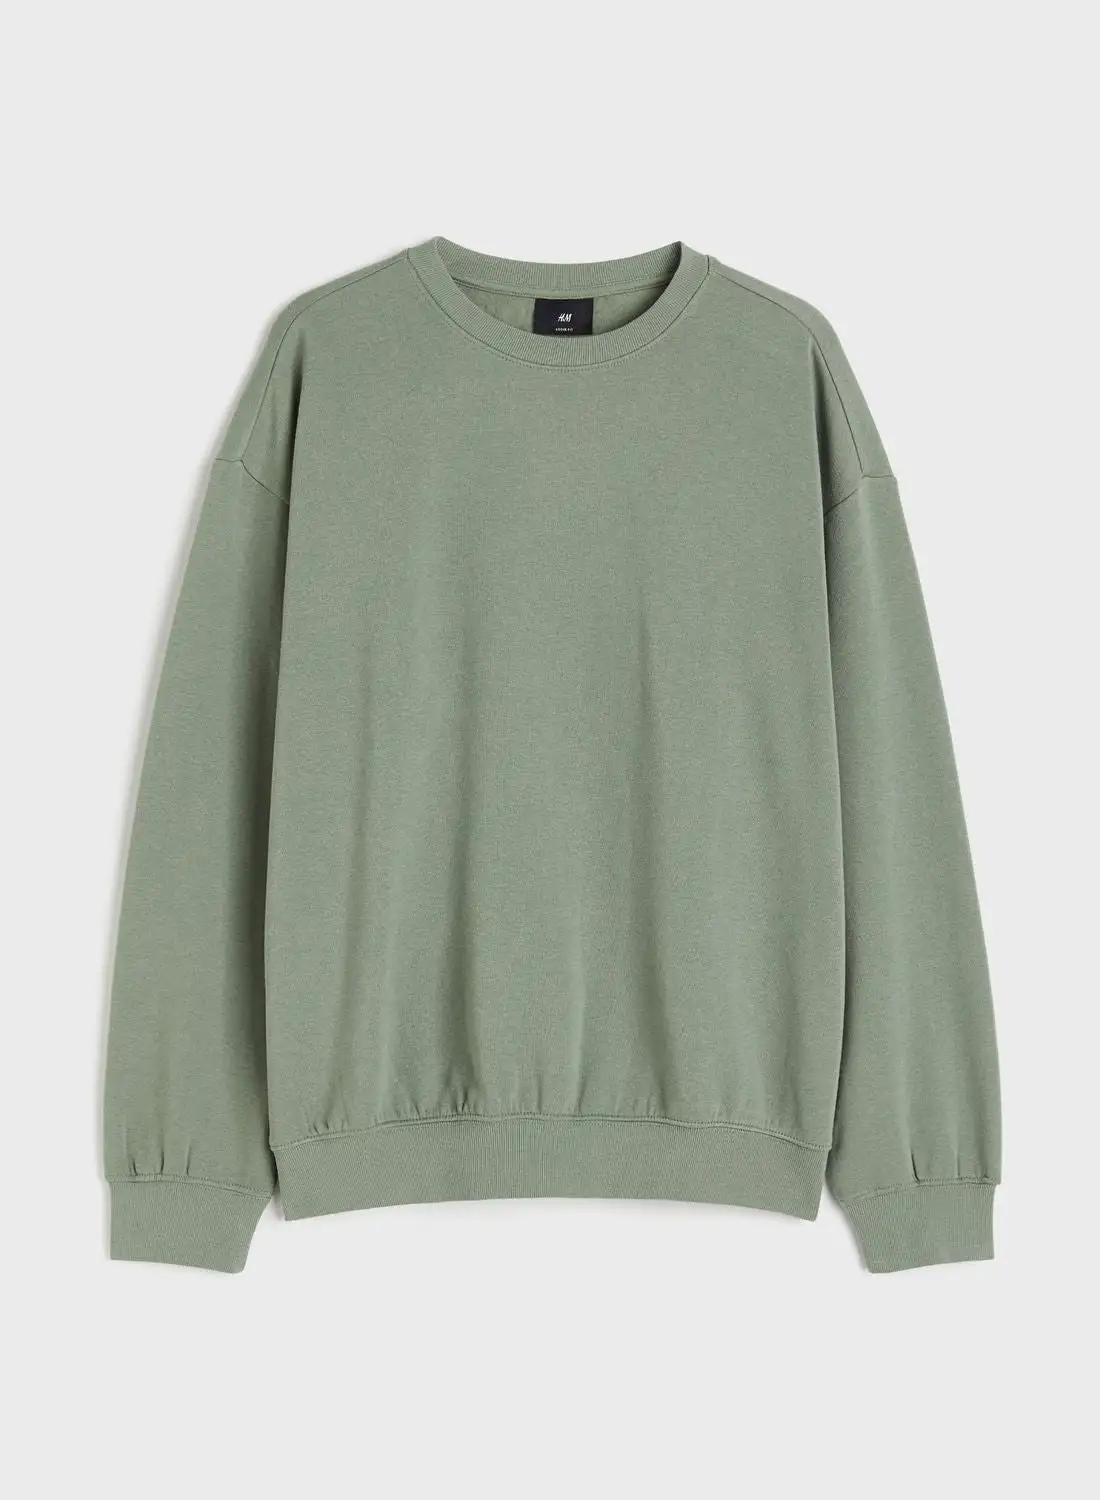 H&M Relaxed Fit Sweatshirt